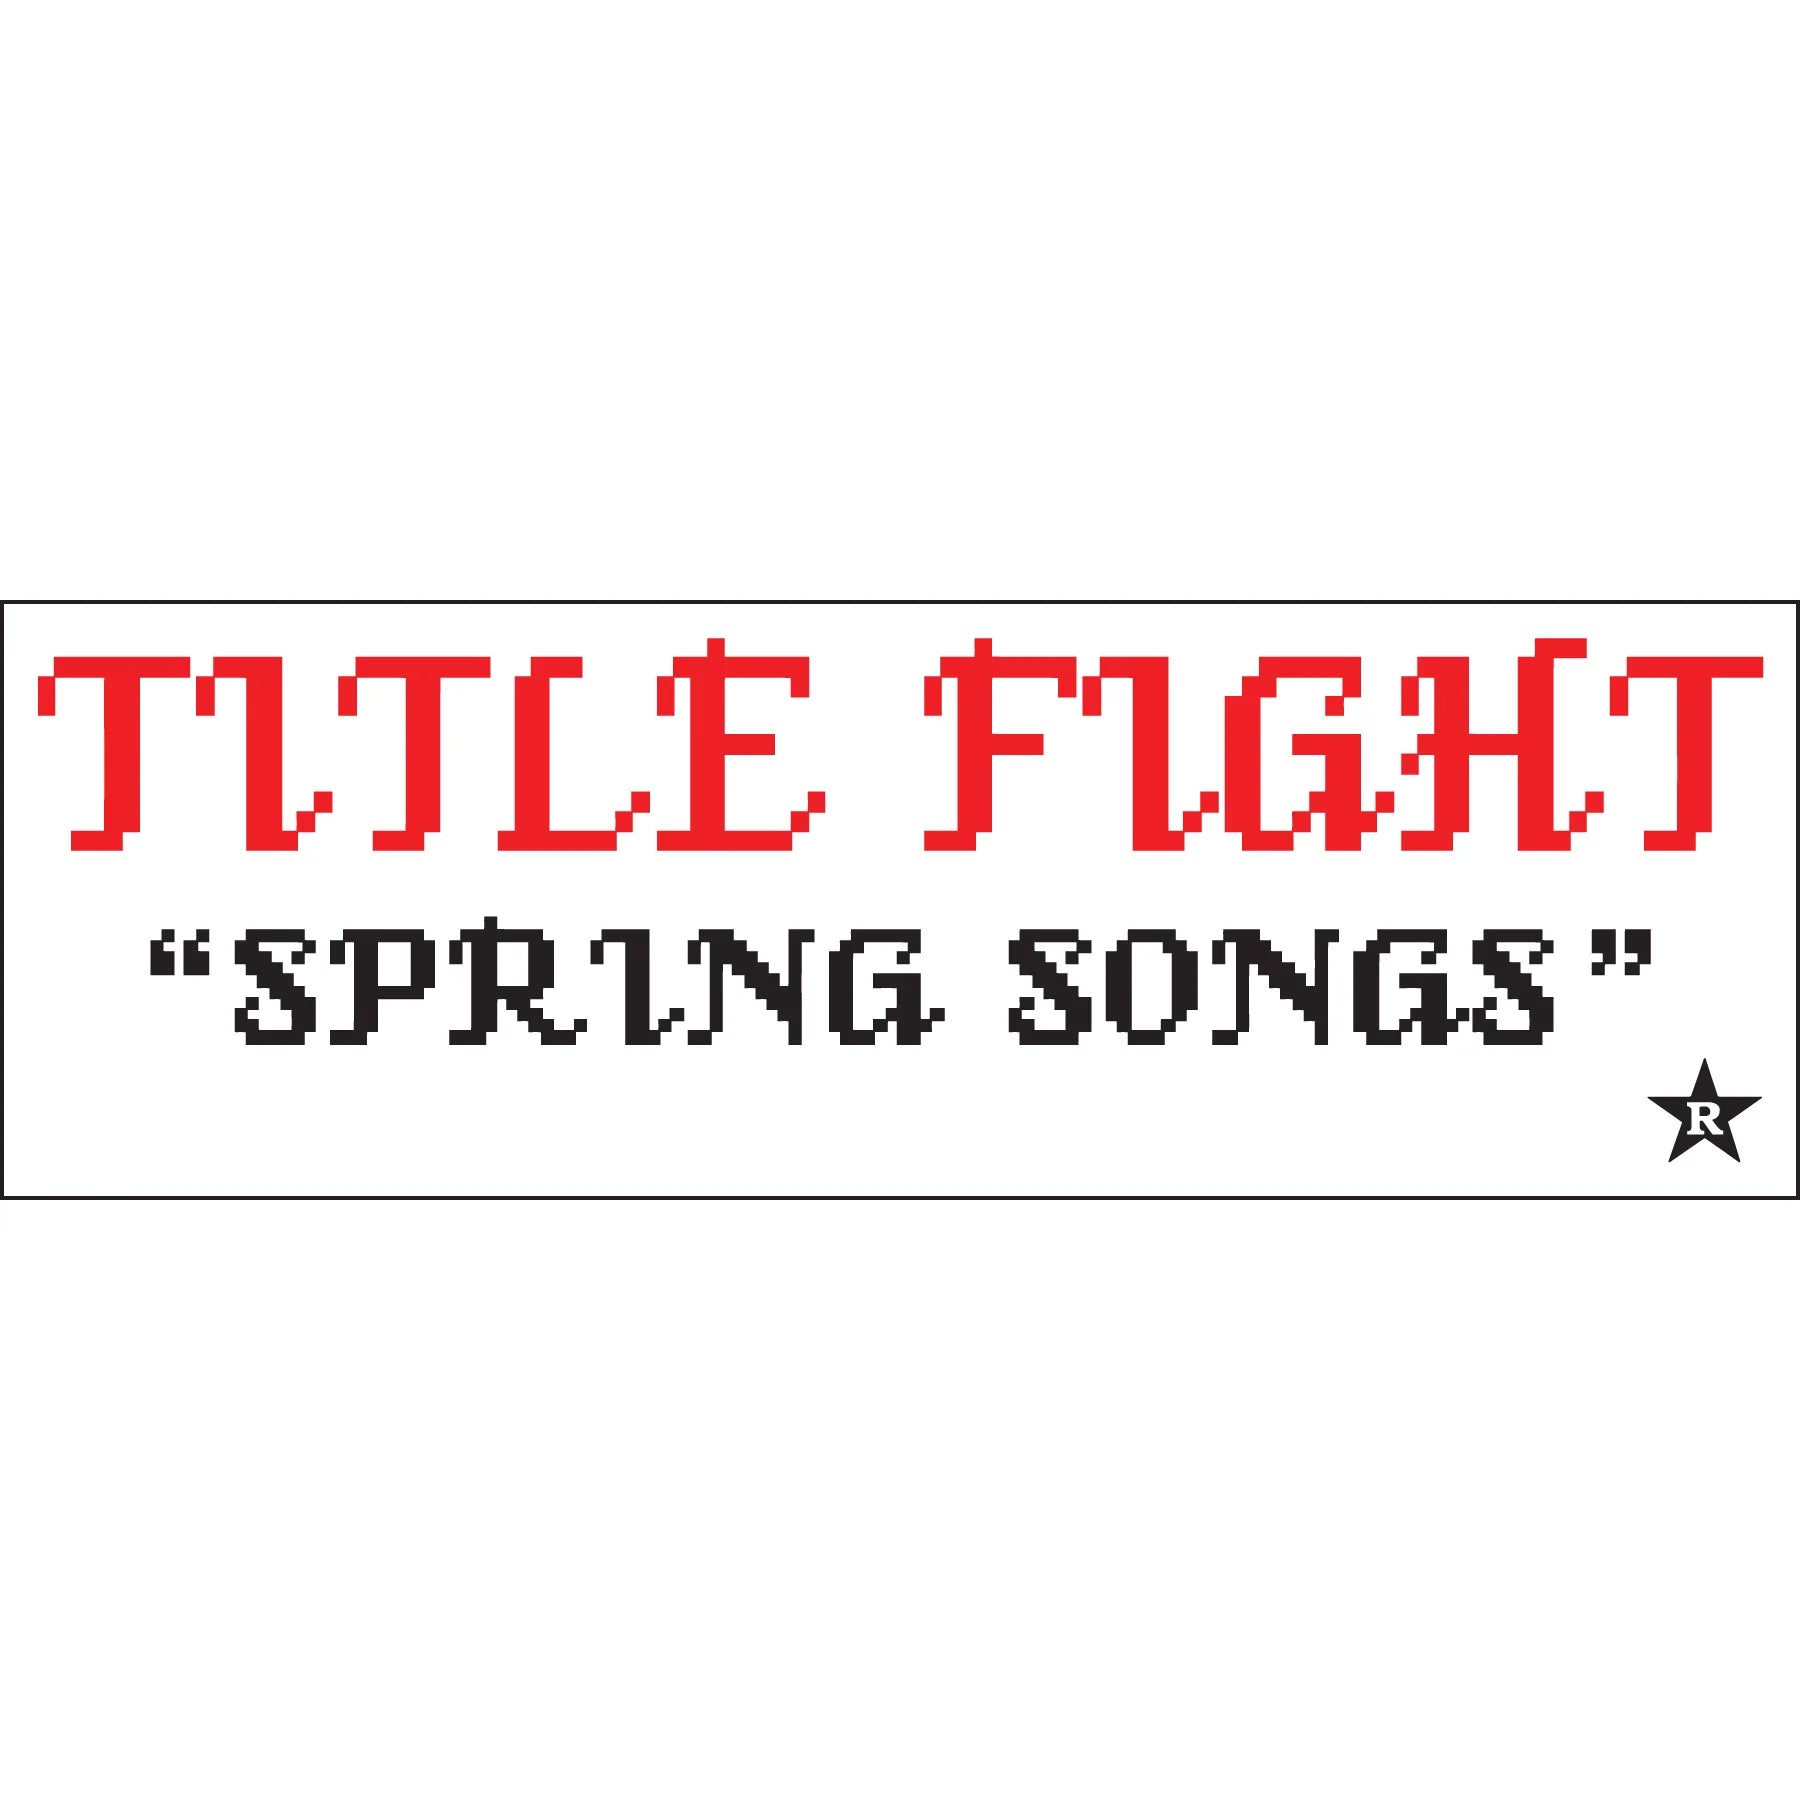 TITLE FIGHT 'Spring Songs' Sticker